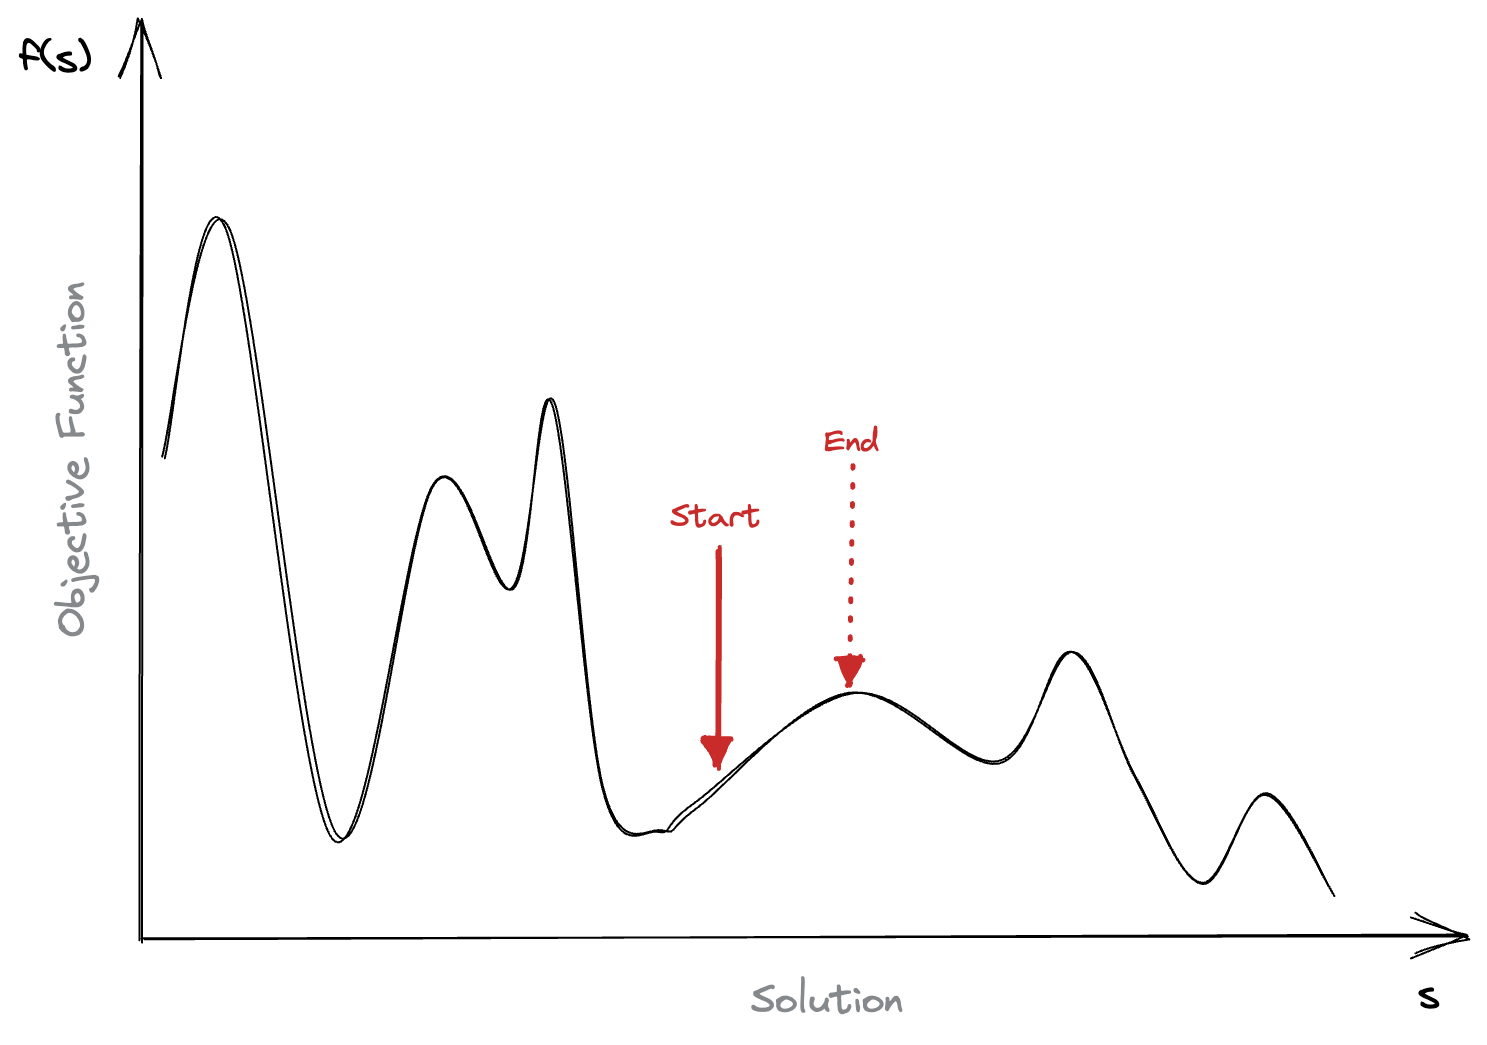 Chart of solution space demonstrating the impact of climbing a locally bad hill.